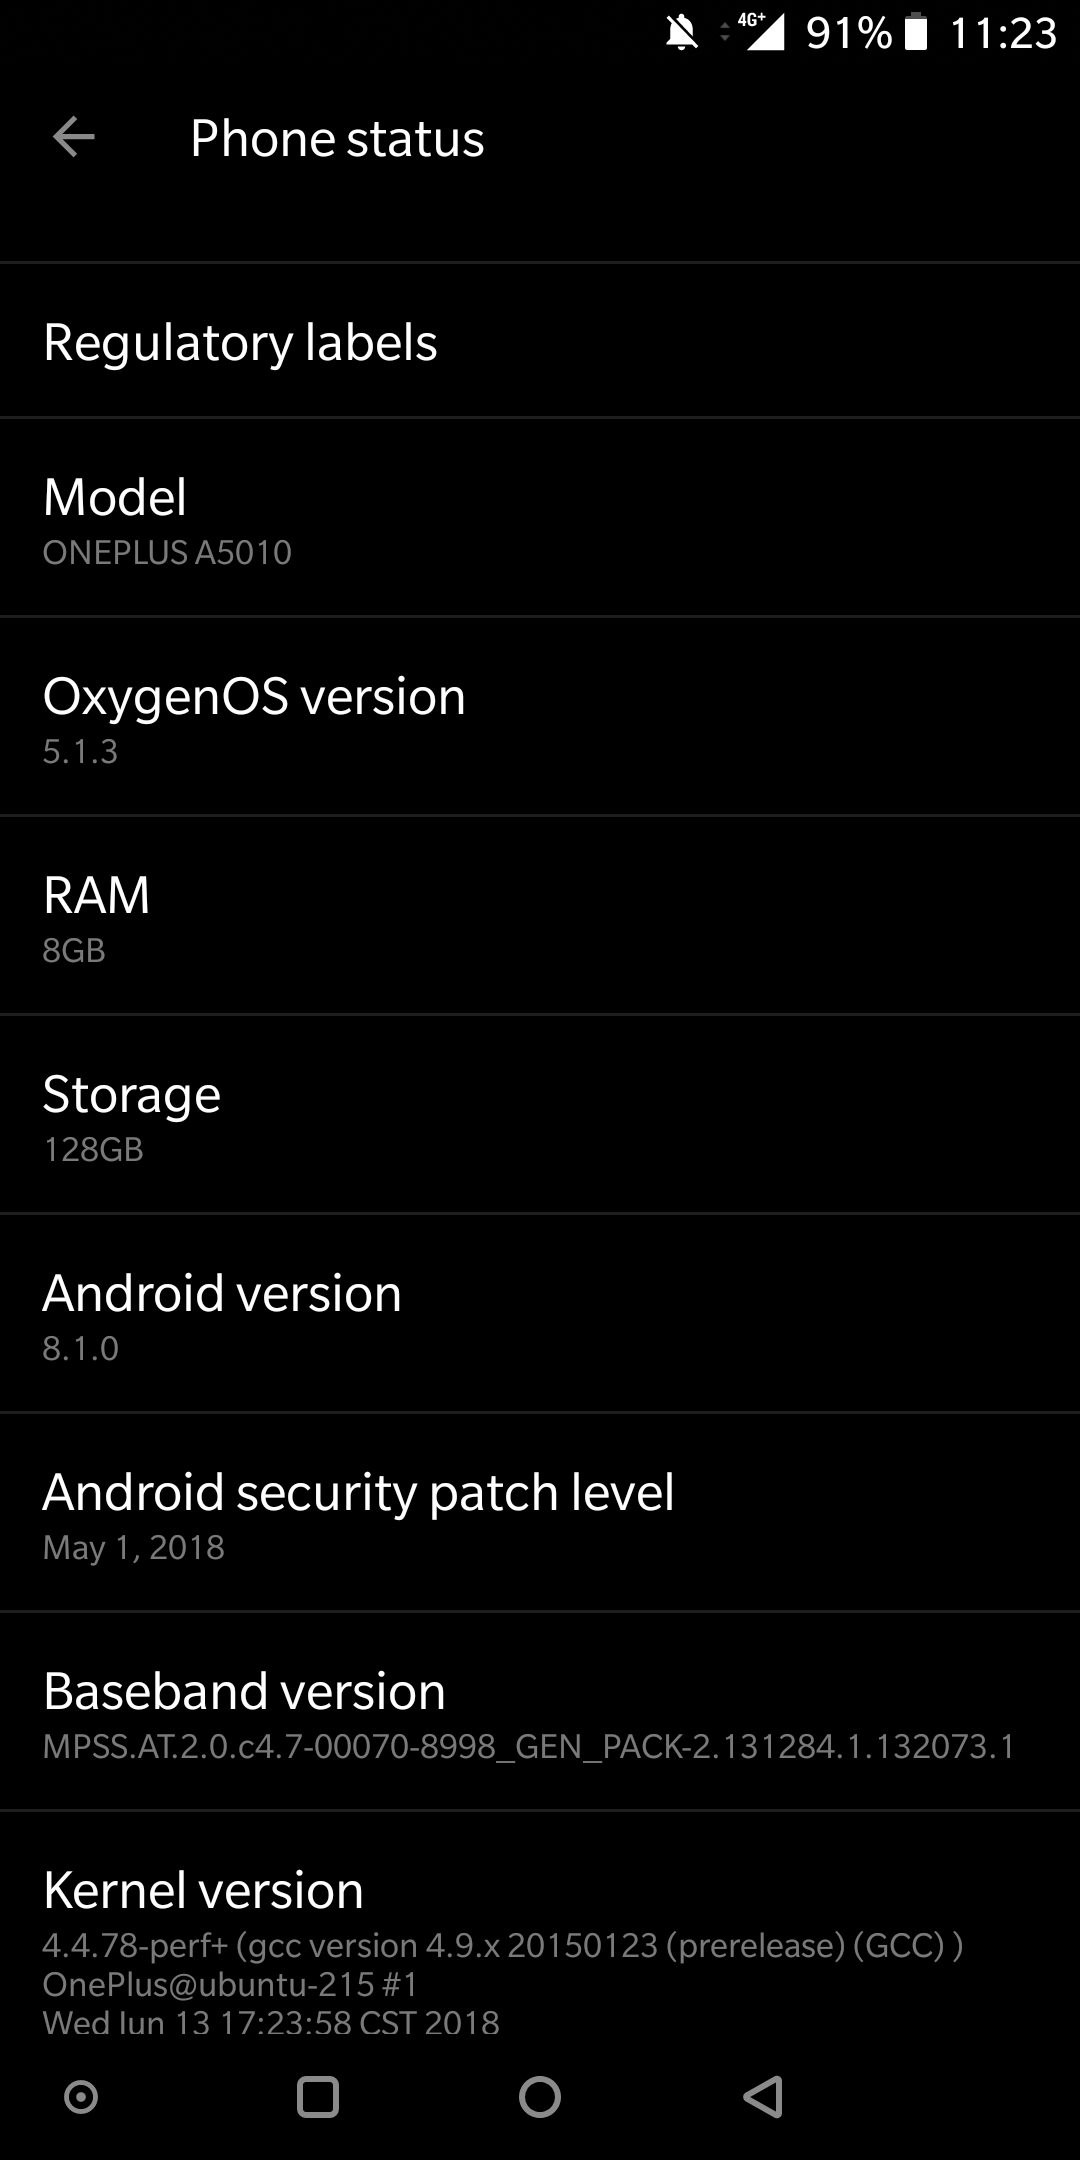 OxygenOS 5.1.3 for OnePlus 5 / OnePlus 5T